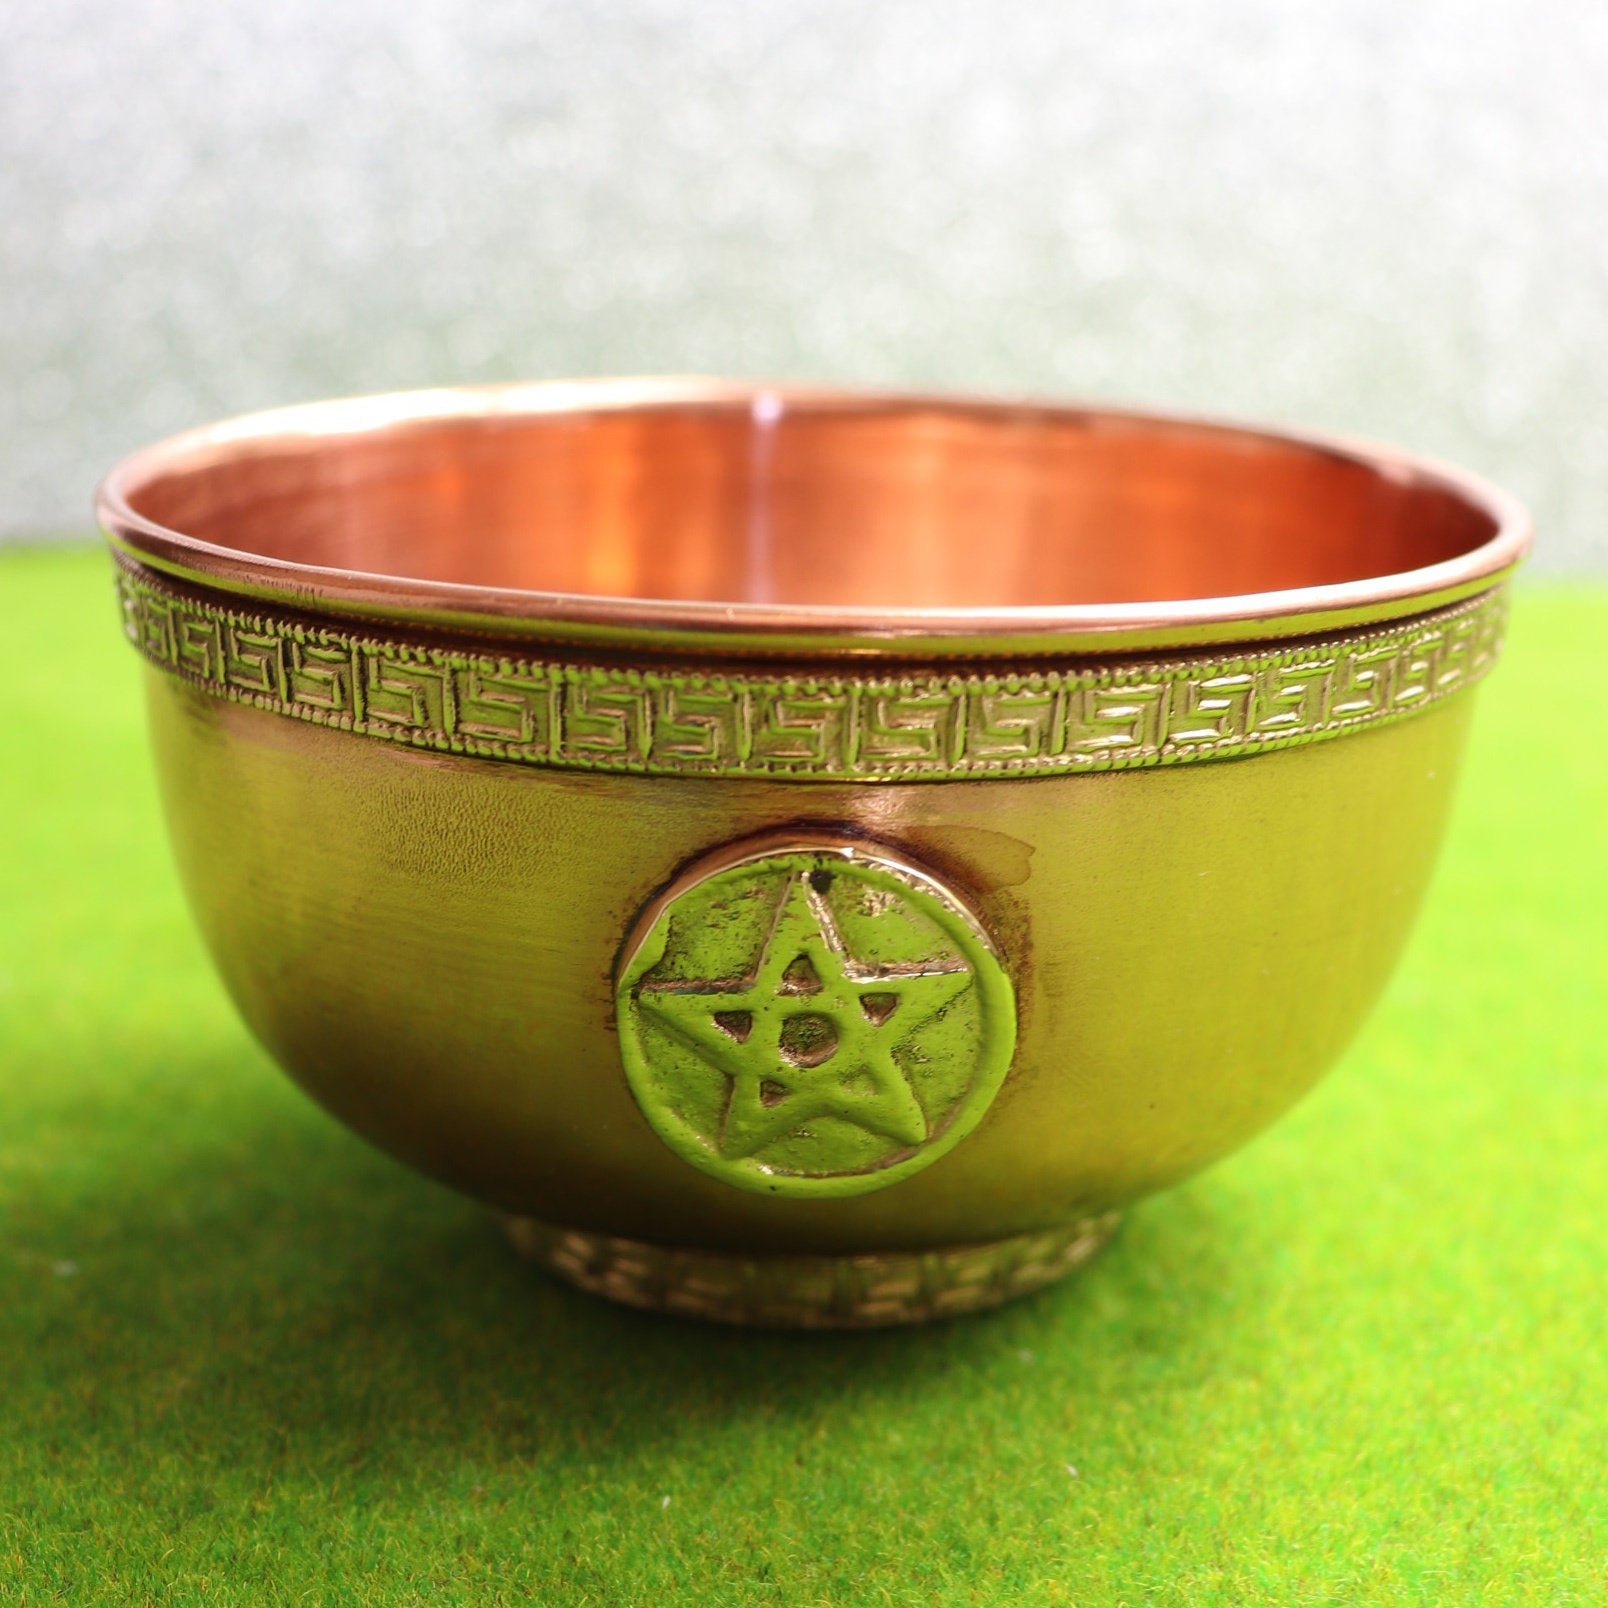 10cm Pentacle Copper Offering Bowl - The Spirit of Life